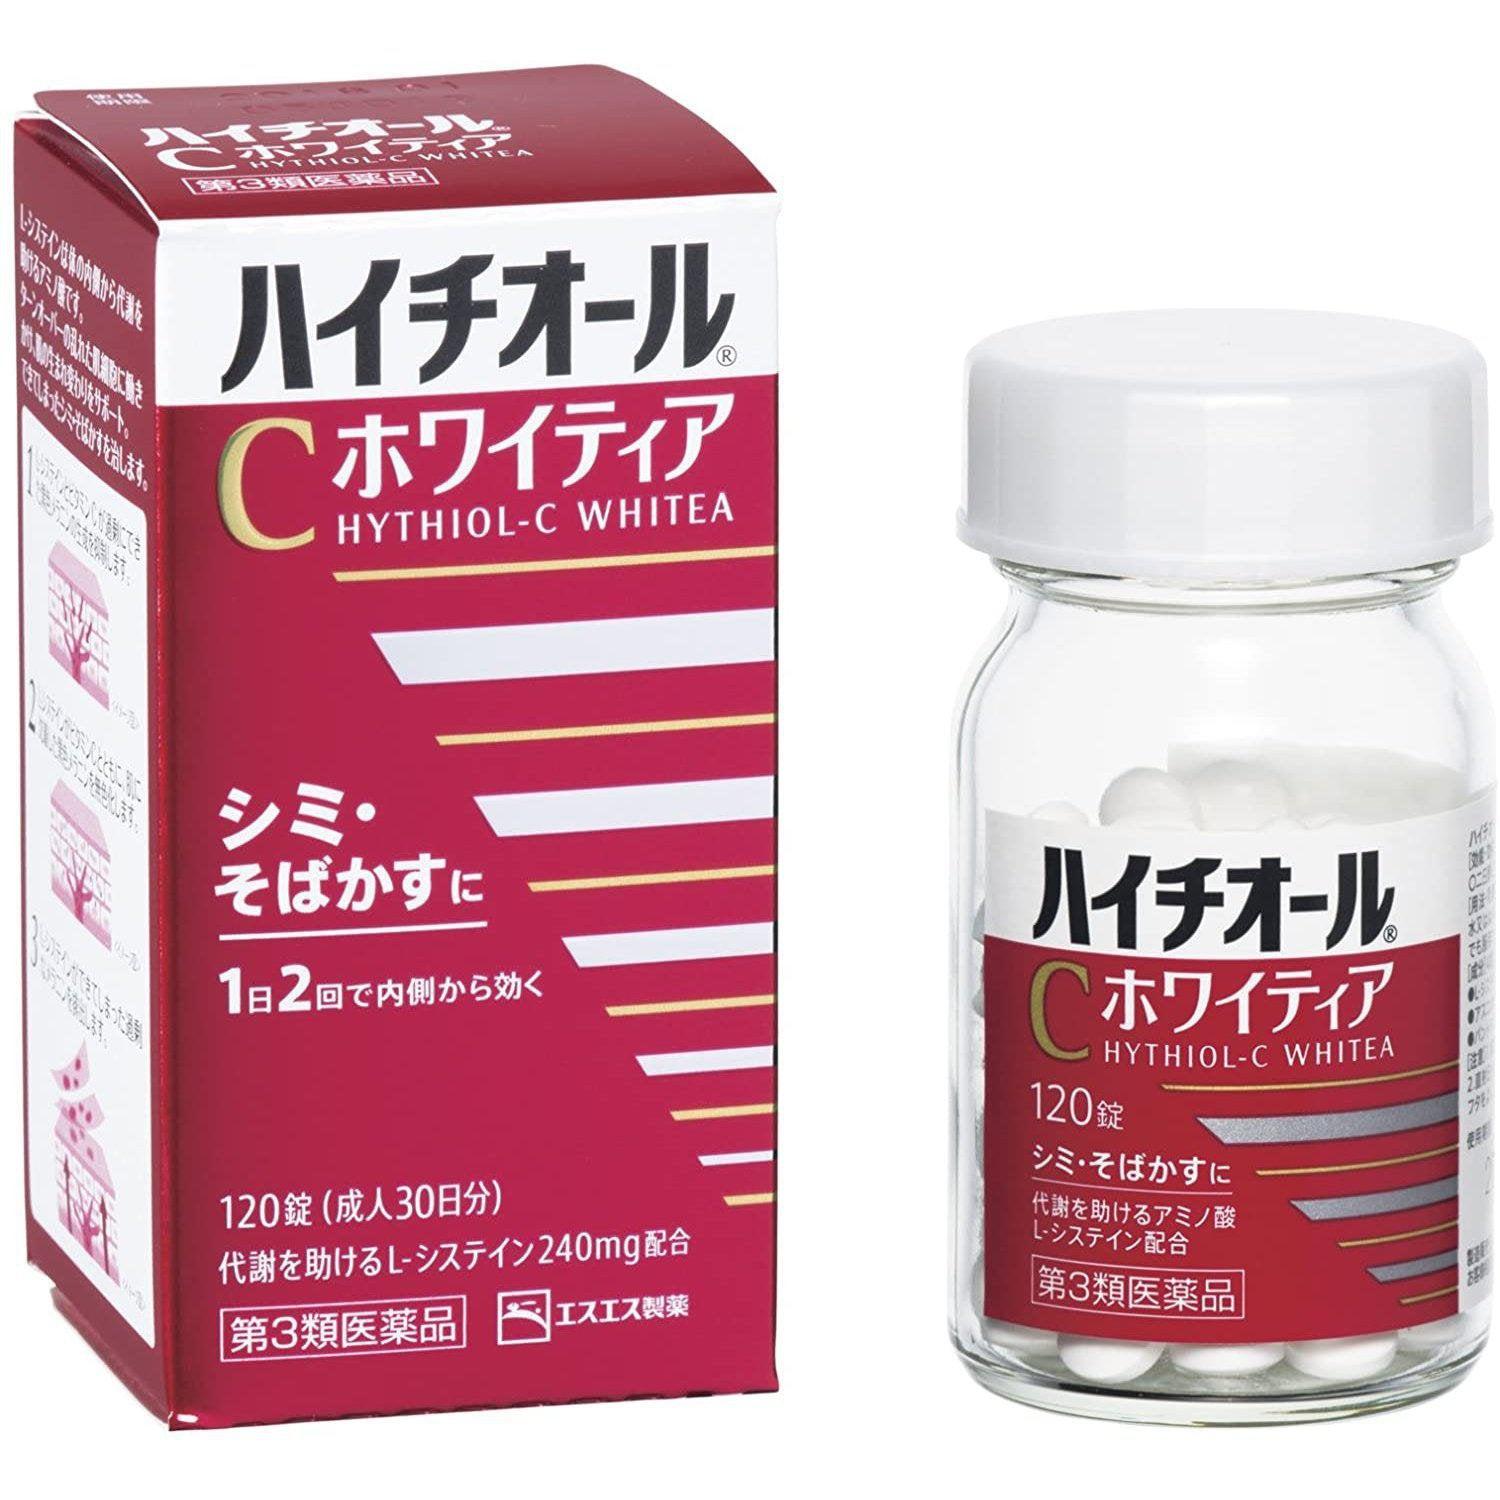 Hythiol C-Whitea Beauty Supplement 120 Tablets (for 30 Days)